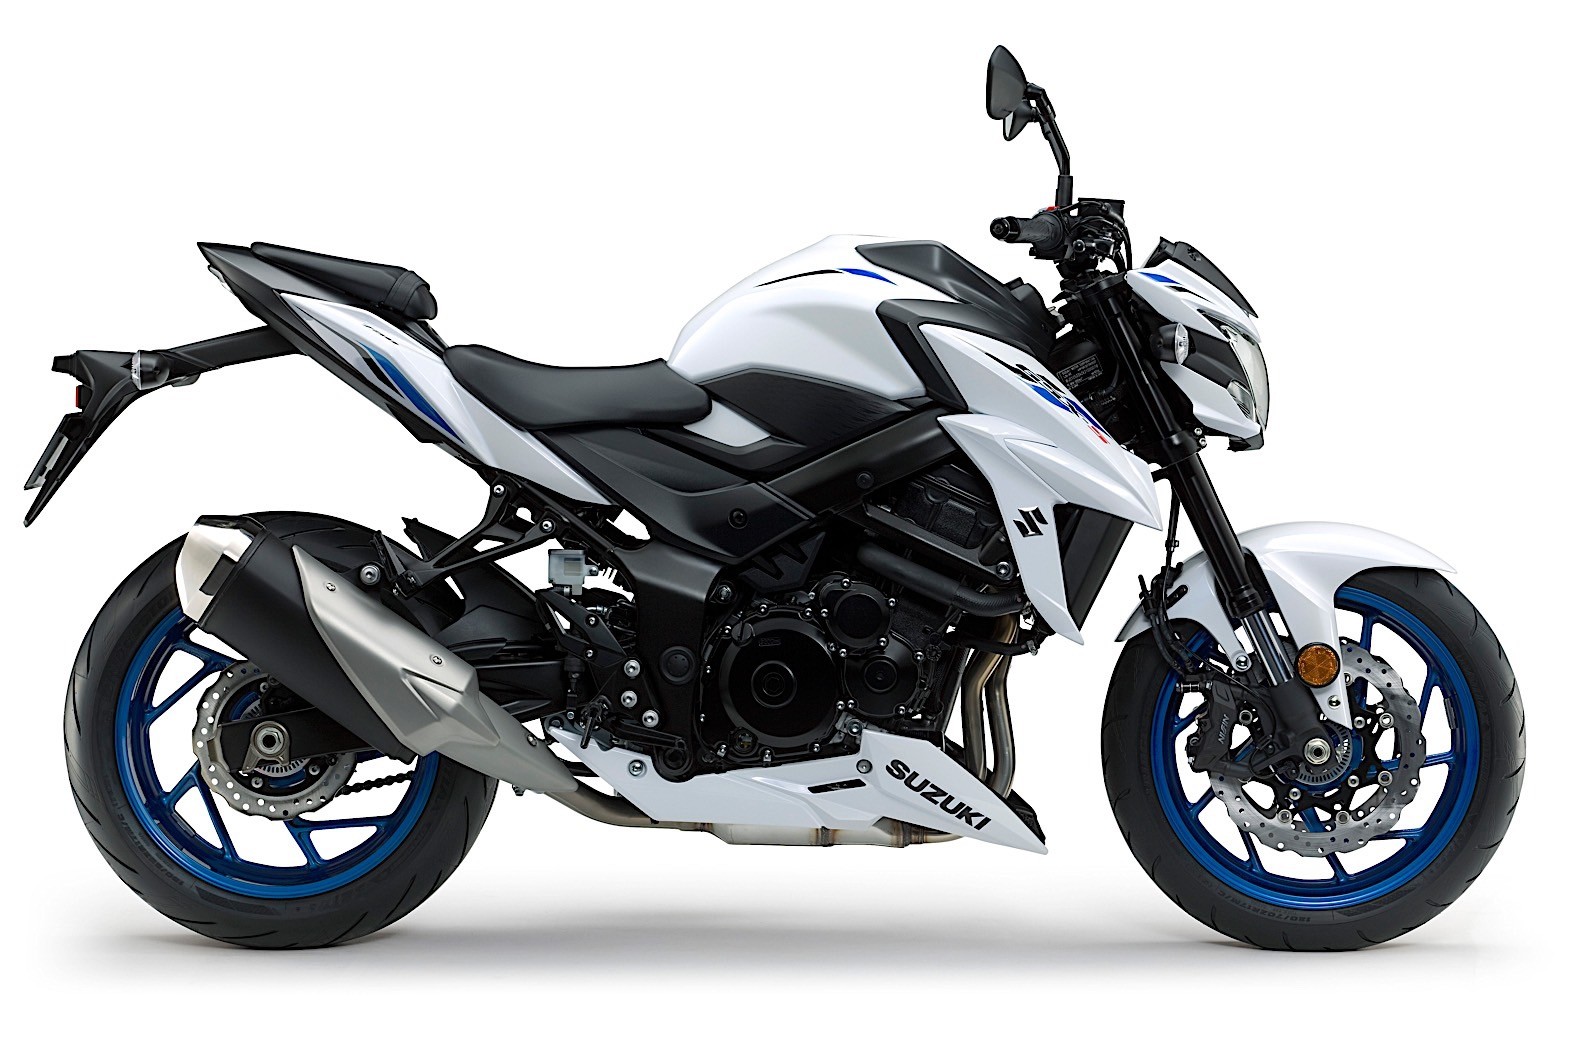 2022 Suzuki Motorcycles Shine in New Colors at the 